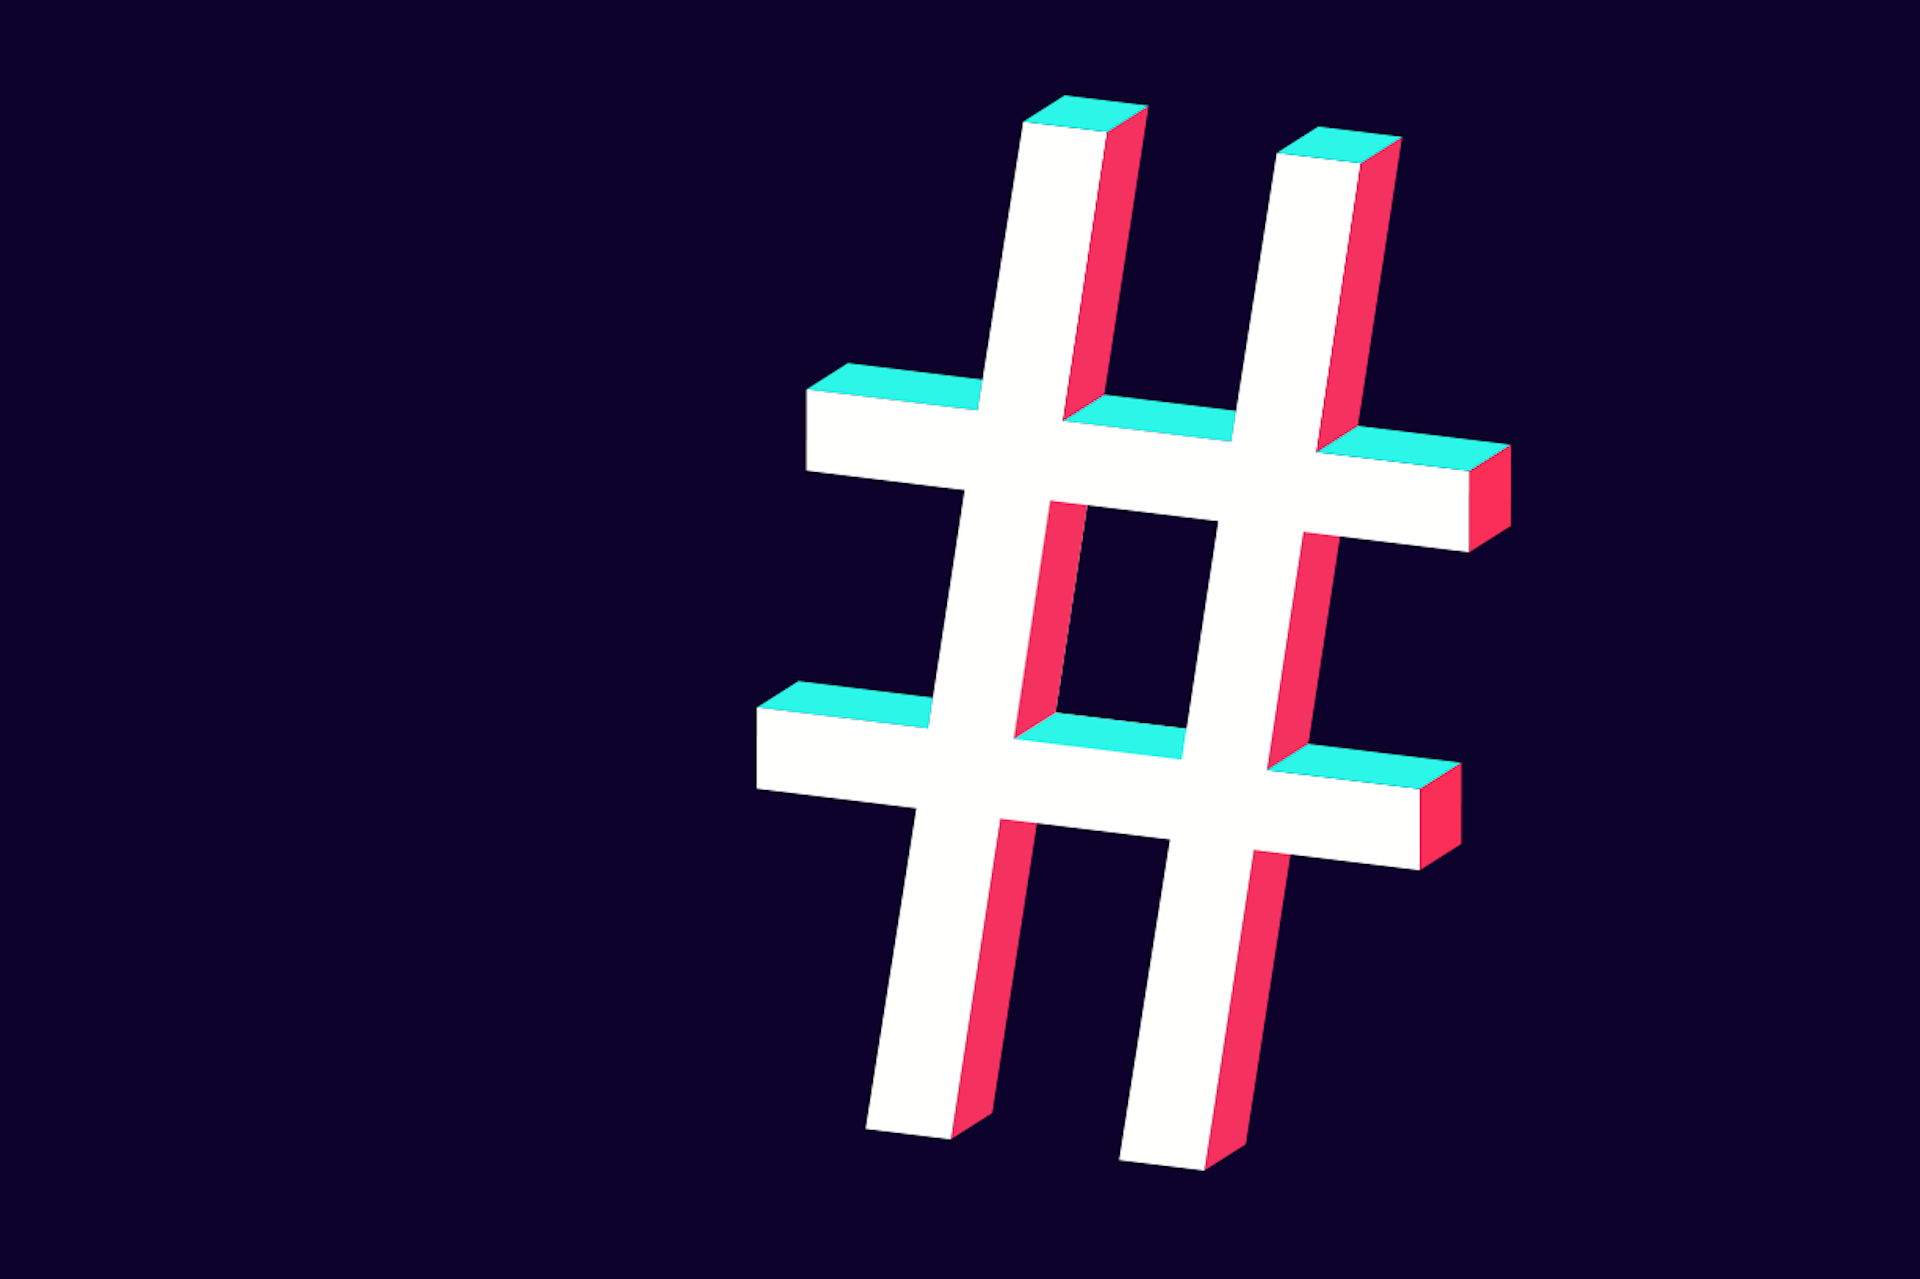 Large hashtag symbol in TikTok logo colors, bright teal and bright pink, on black background. TikTok hashtag strategy blog post.